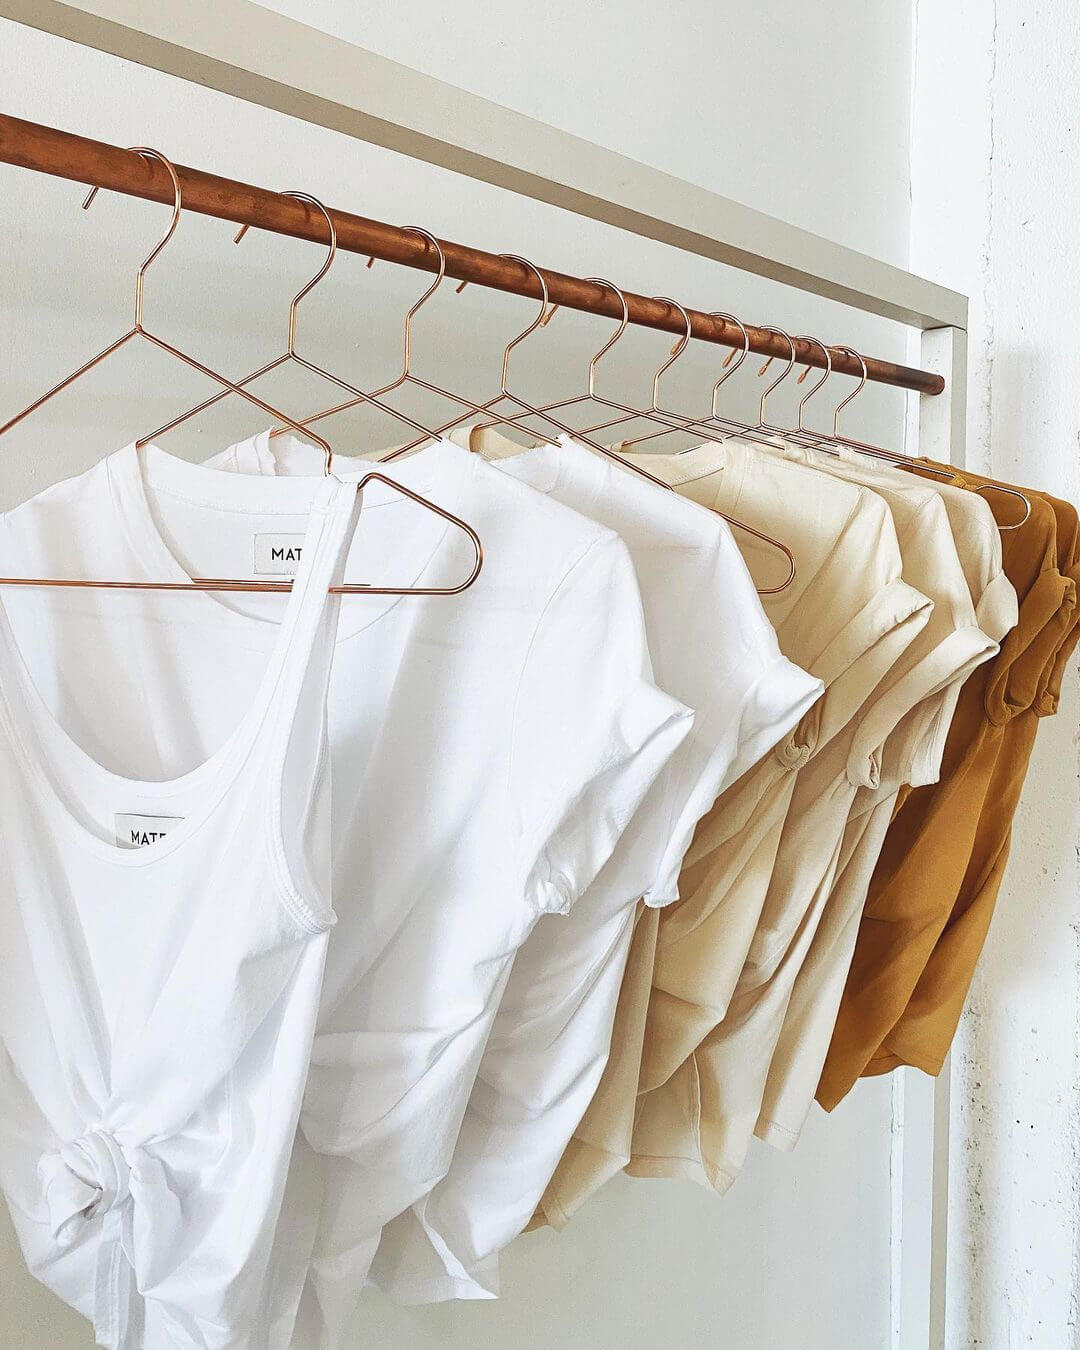 Sustainable basics from MATE the label